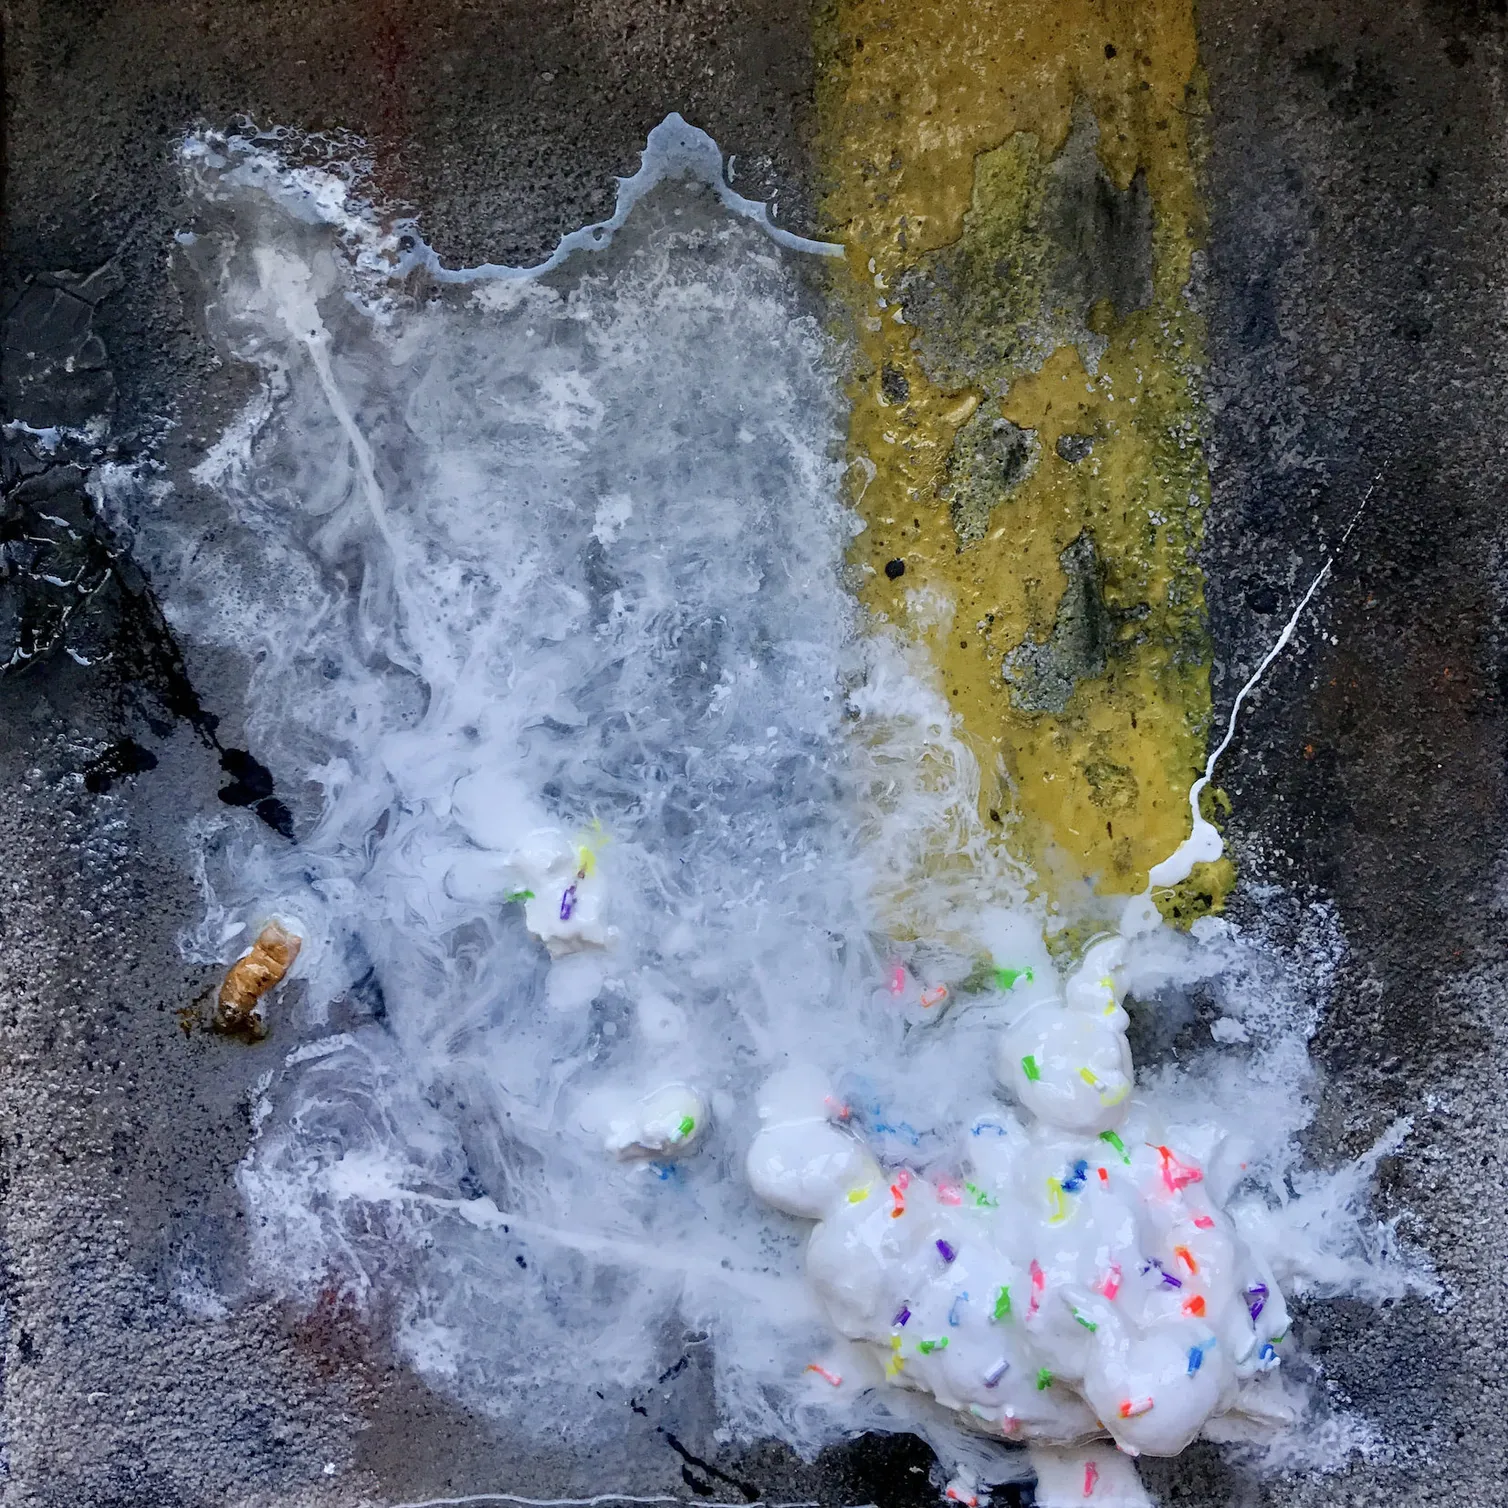 A three-dimentional painting of a ball of white ice cream, with rainbow sprinkles, splattered across dark, textural, parking lot asphalt. The splattered dessert overlaps an amber yellow line denoting a parking stall towards the top of frame. There is a discarded, smashed cigarette butt laying in a puddle of splattered ice cream to the left of the ice cream ball.